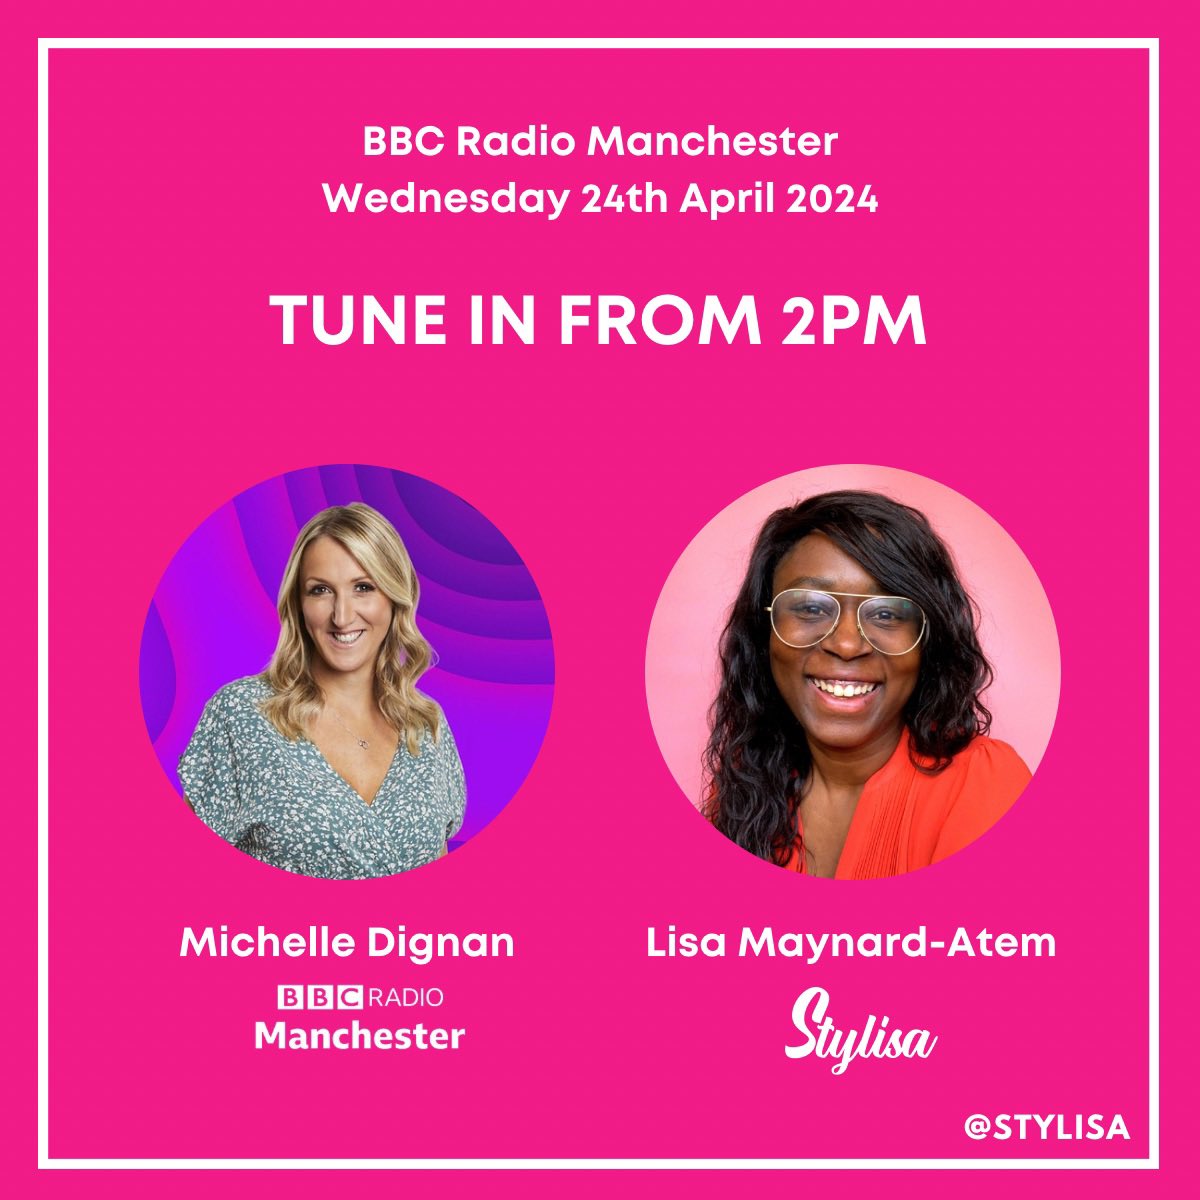 Catch me on @BBCRadioManc today (Weds 24th Apr, 2pm - 3pm), chatting to @MichelleDignan about some of the trending topics of the day.🎙️

#BBCRadioManchester #MediaCity #IntheStudio #STYLISA